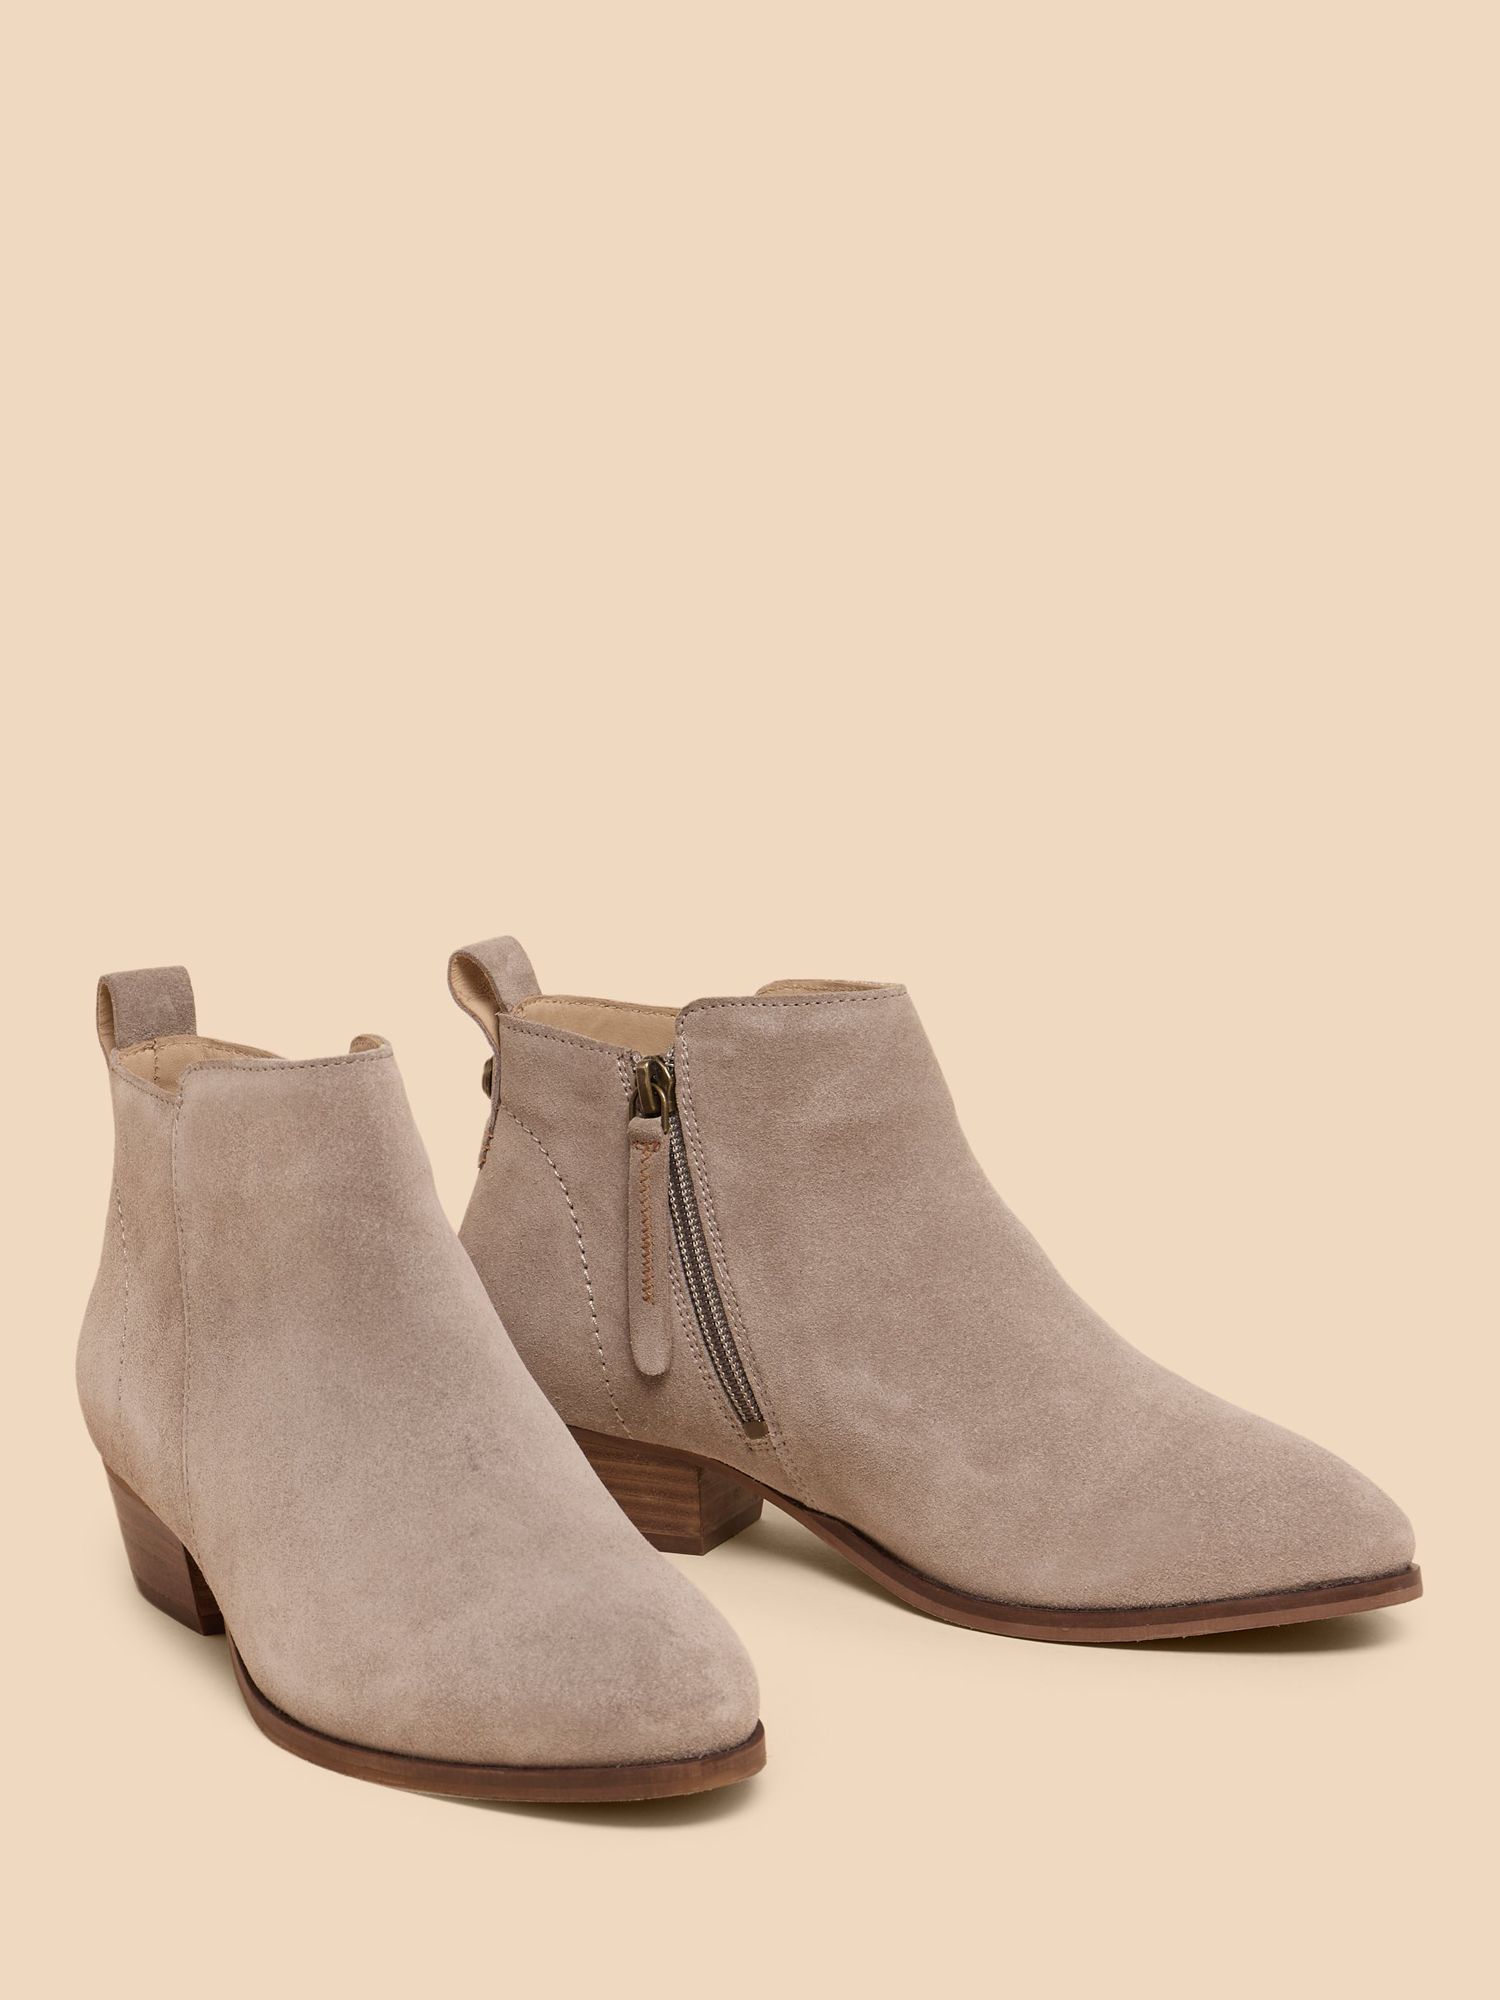 White Stuff Suede Ankle Boots, Light Grey, 8